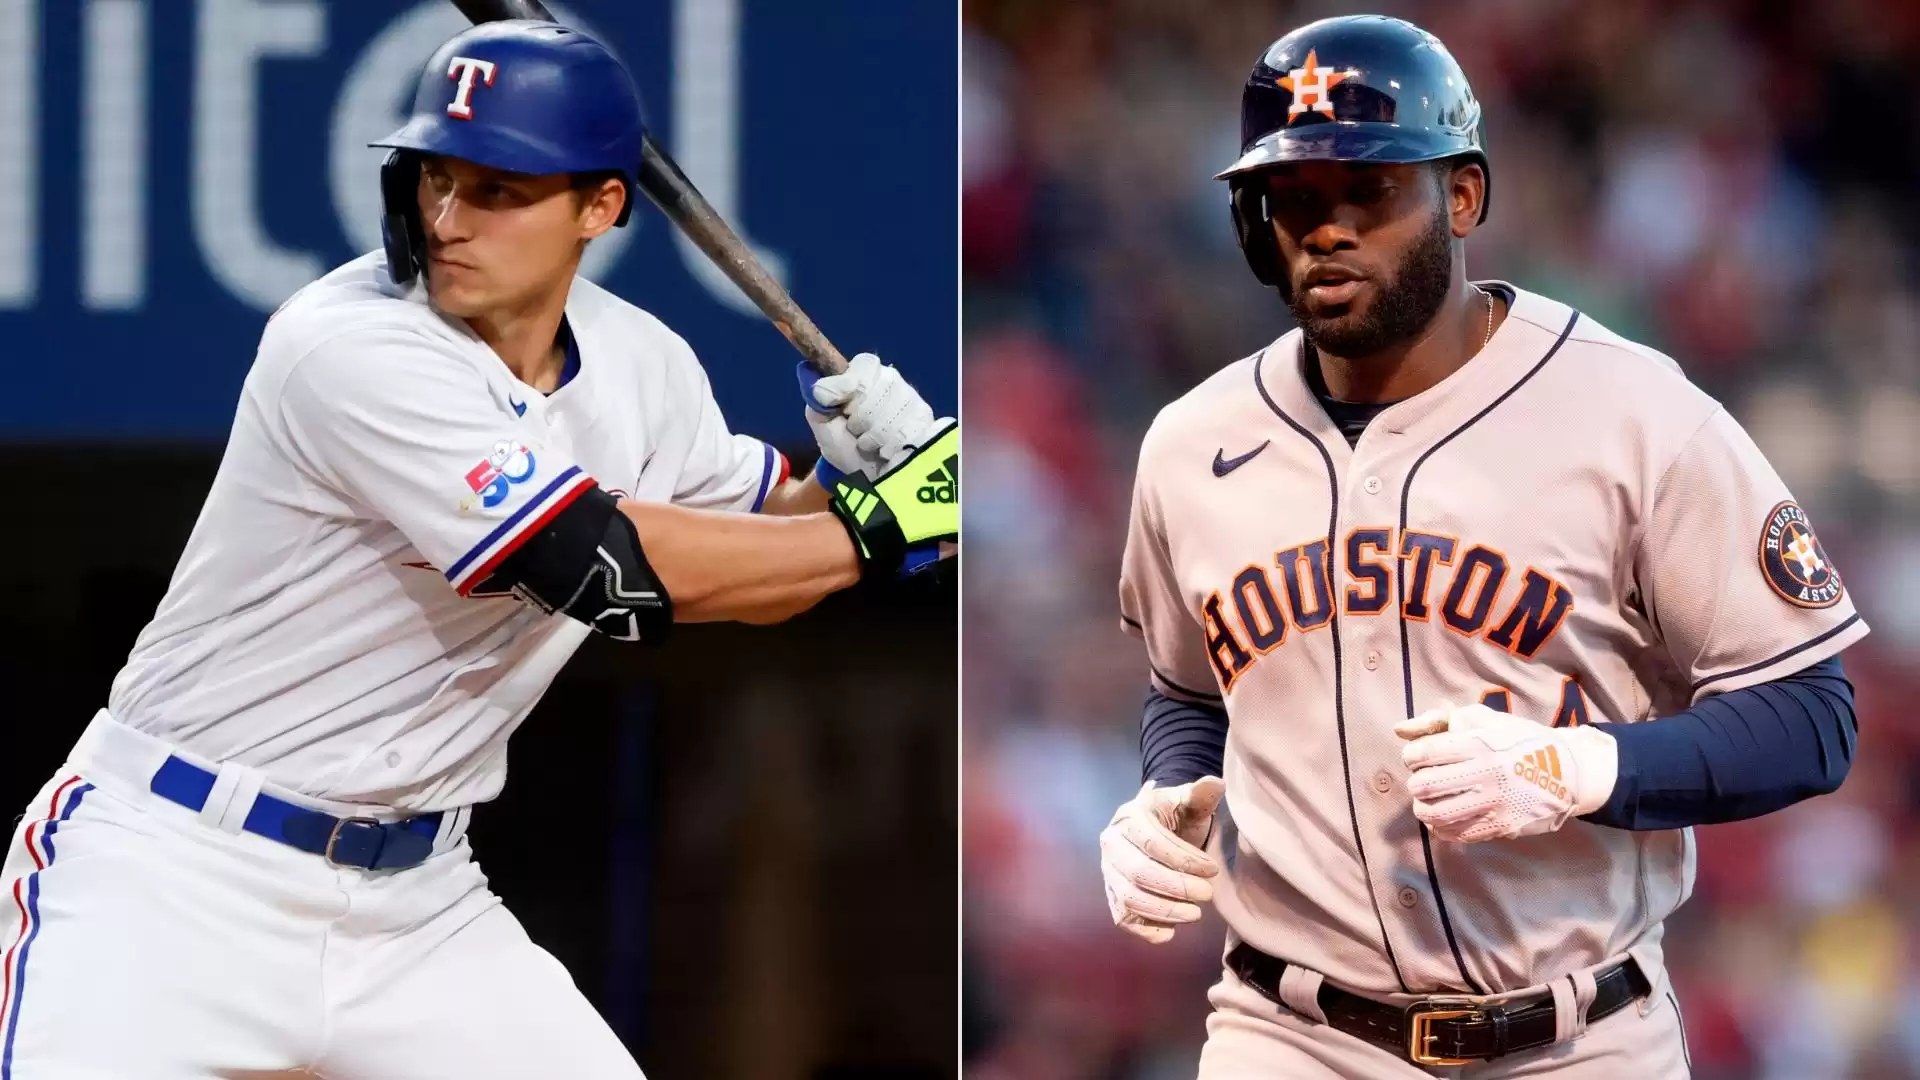 Rangers vs. Astros: Channel, Time, TV Schedule for 2023 ALCS Game 2